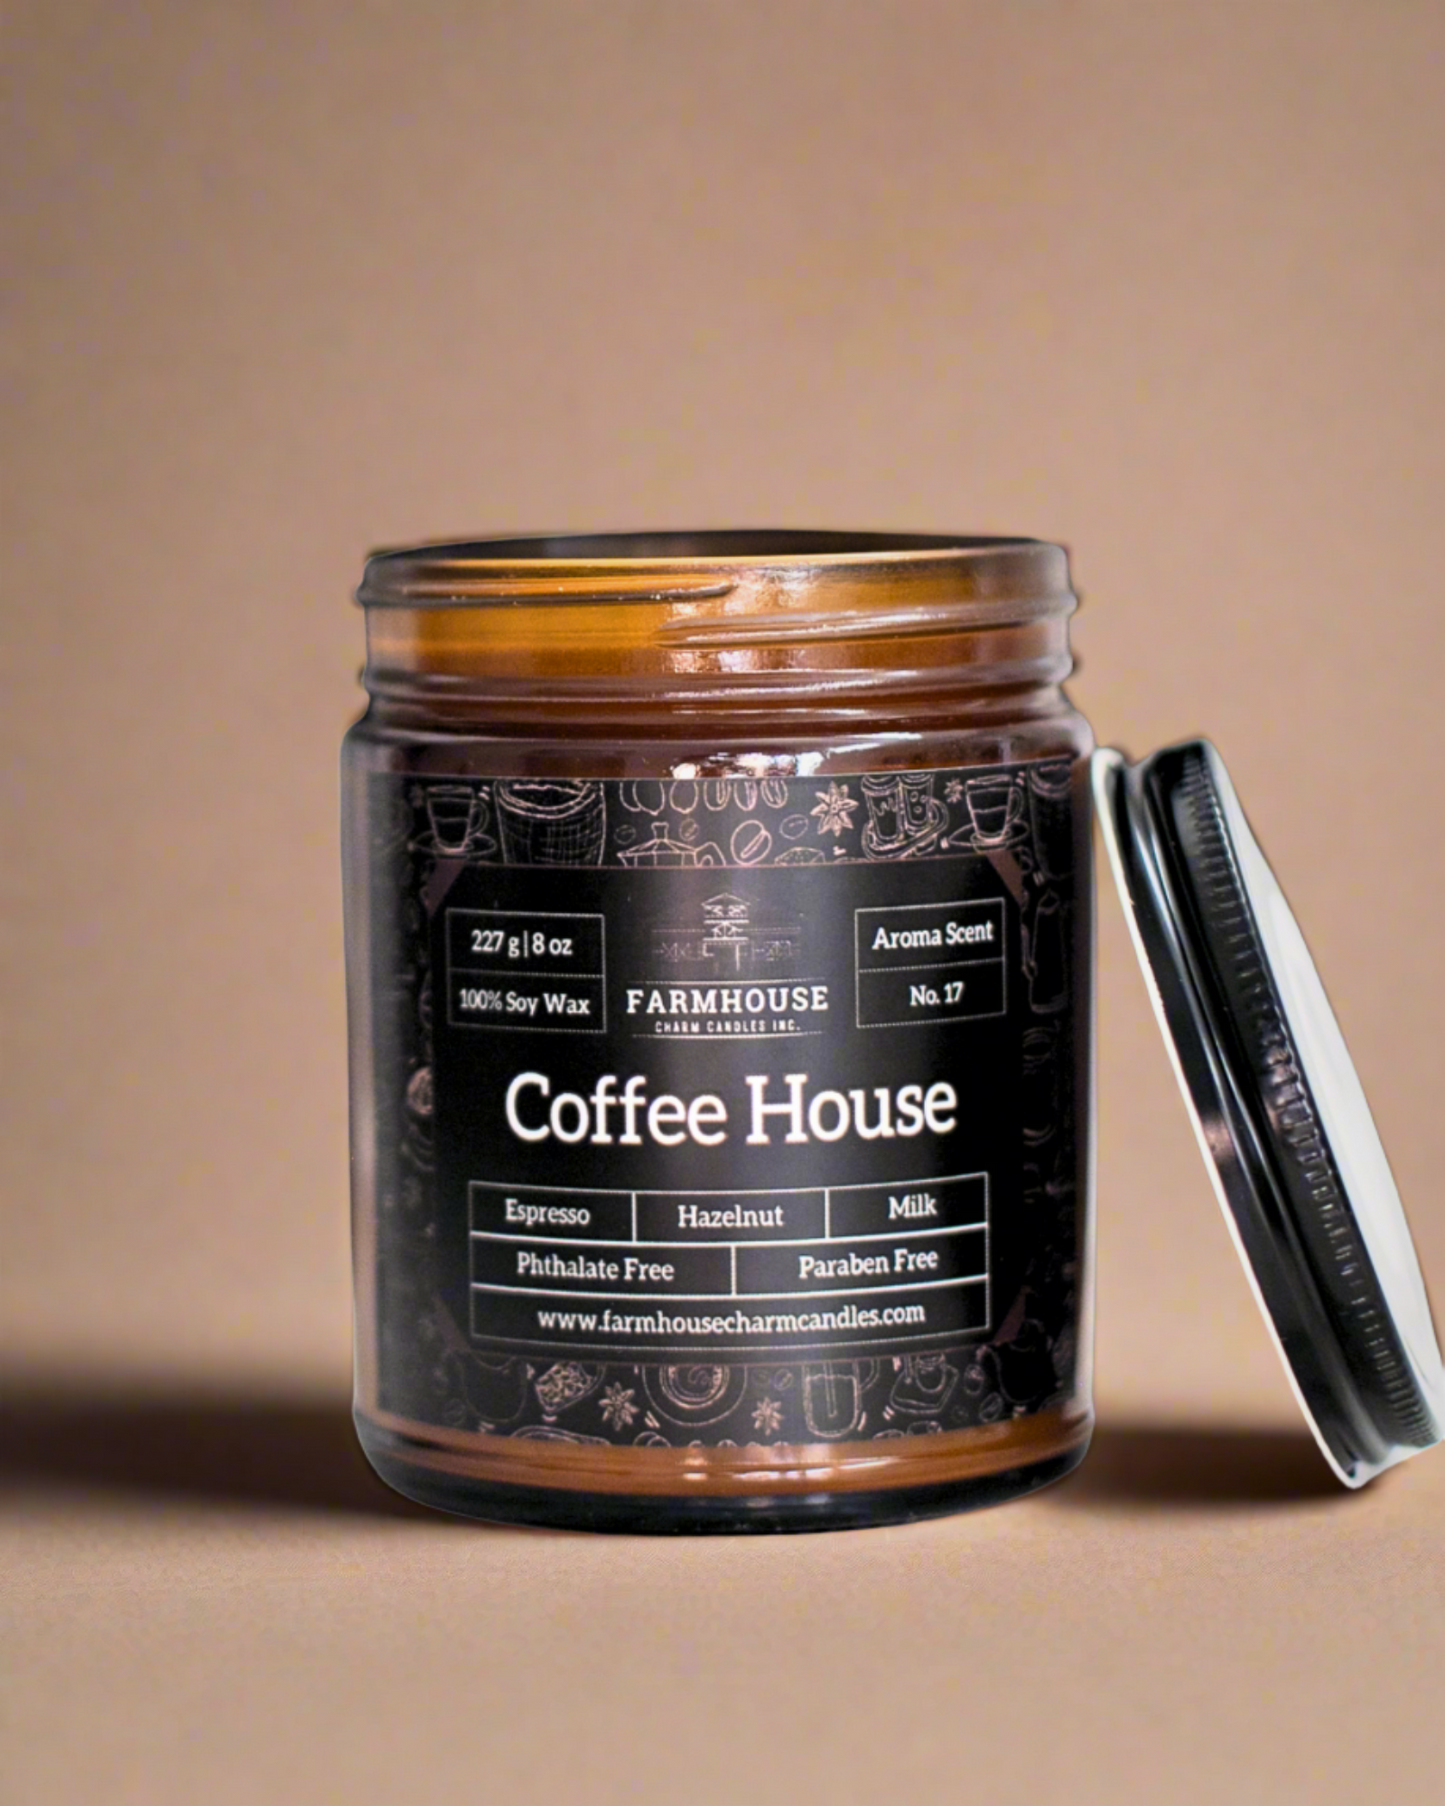 Calling all coffee lovers! If the smell of coffee brewing in the morning is your kind of nostalgia, then Aroma Scent No. 17 Coffee House Soy Candle is a must-try. Imagine waking up to the rich aroma of a medium-dark roast, complemented by hints of hazelnut, caramel and warm milk. It's like a warm hug for your senses. This candle isn't just about waking up; it's about creating a cozy, welcoming vibe in your home that makes every moment feel special. www.farmhousecharmcandles.com